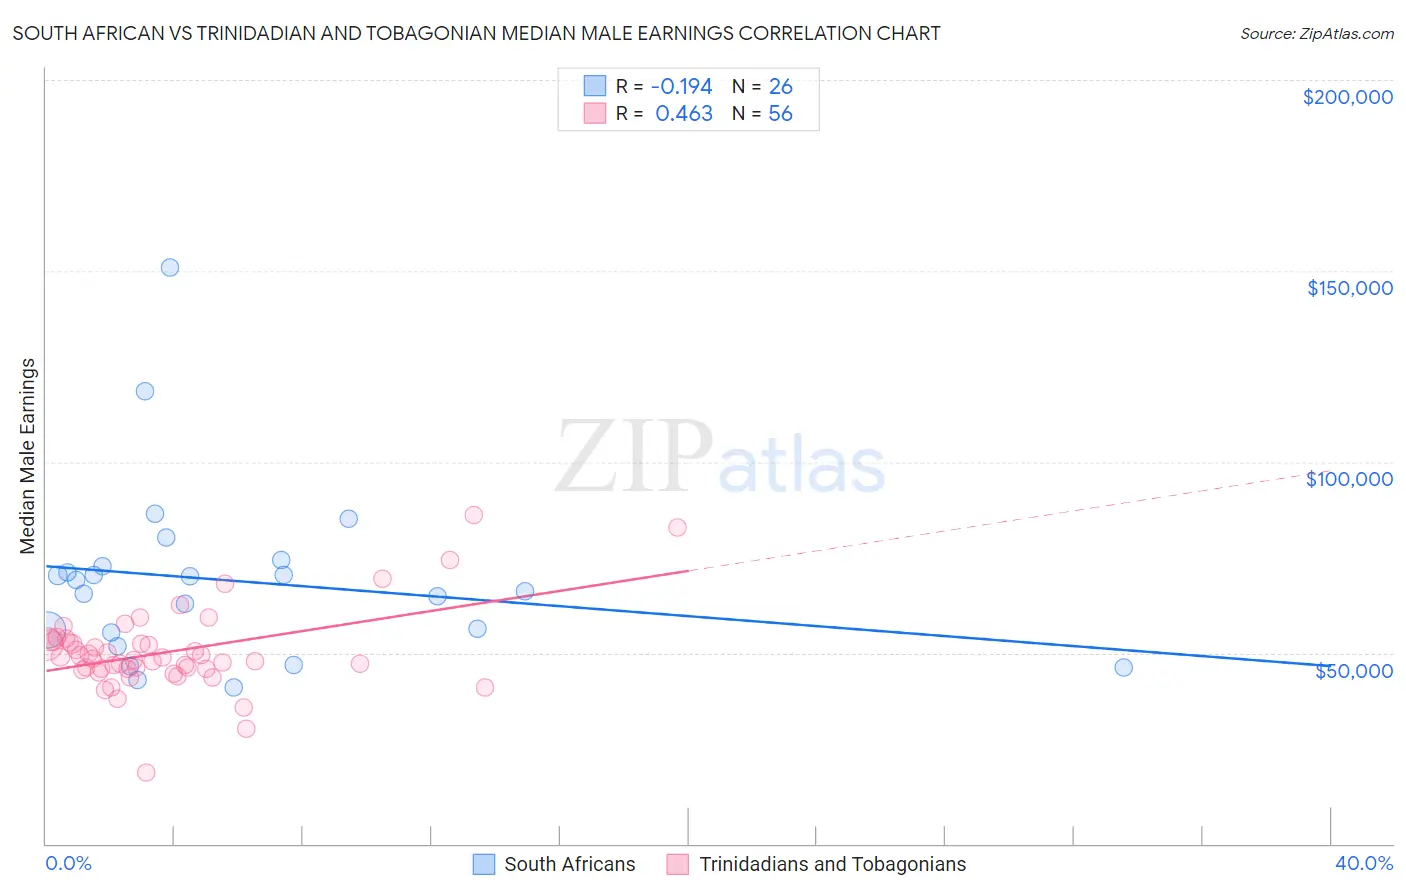 South African vs Trinidadian and Tobagonian Median Male Earnings